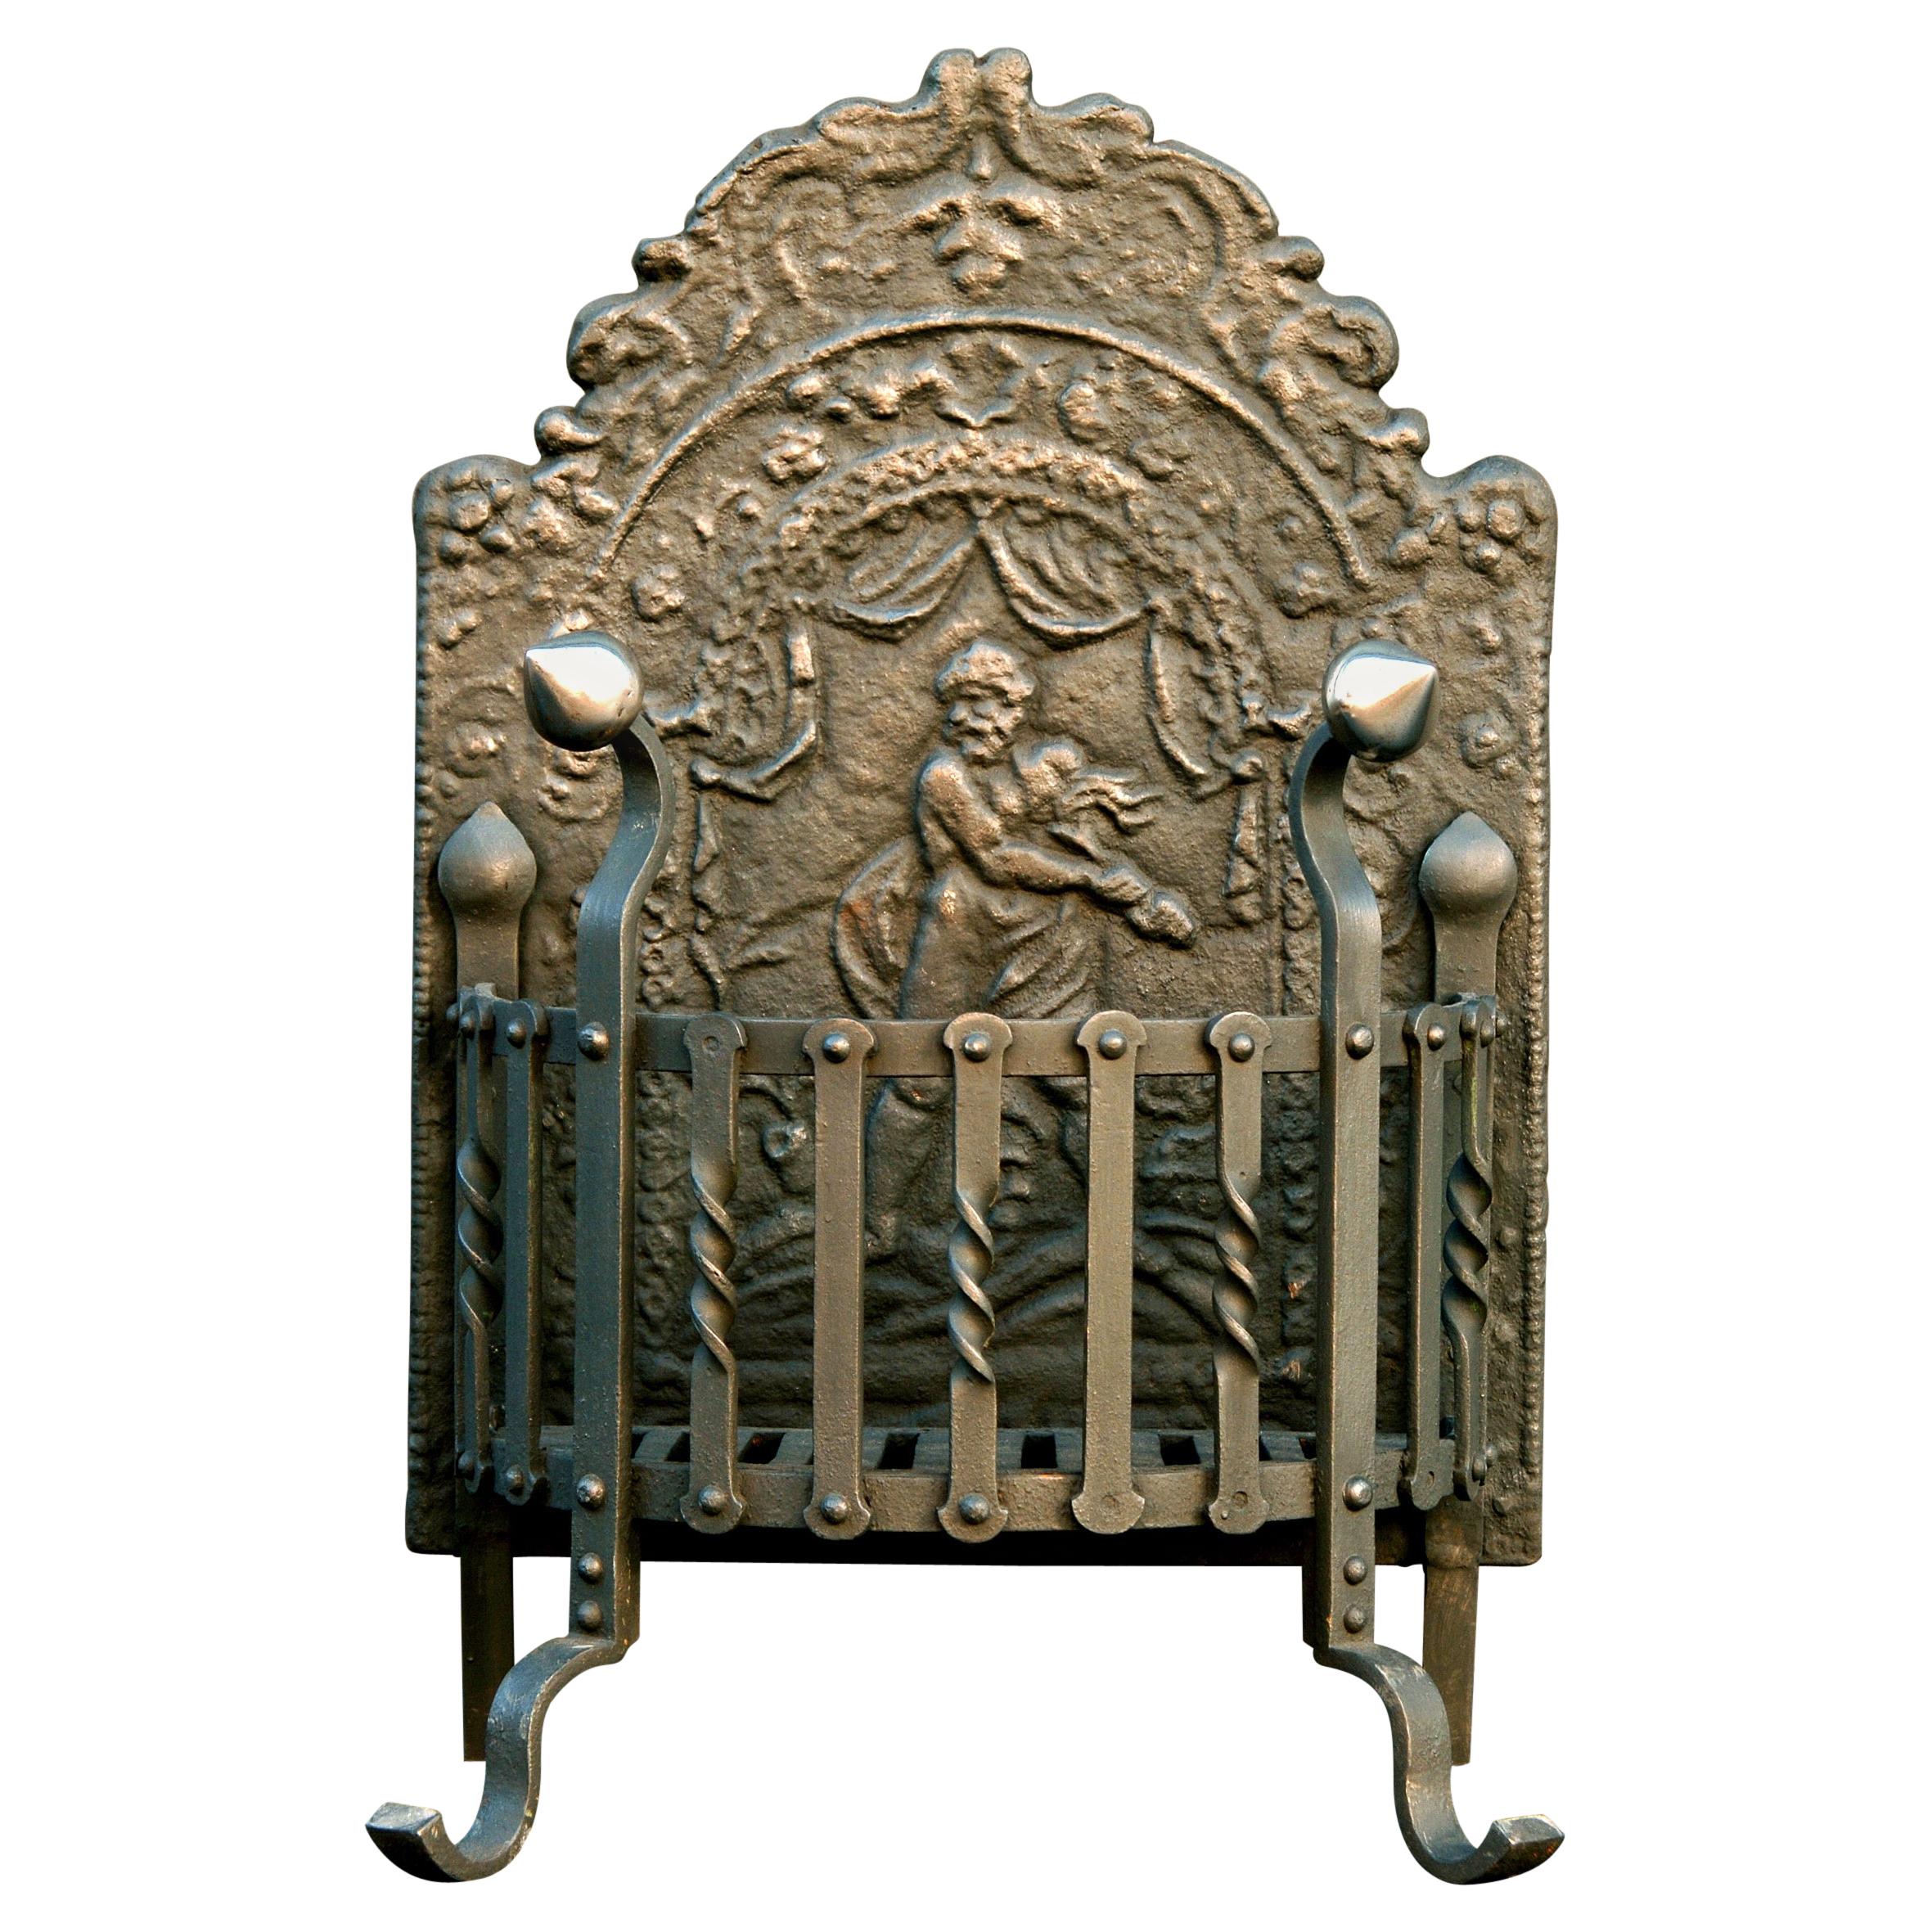 19th Century Wrought Iron Firegrate with Decorative Cast Iron Fireback